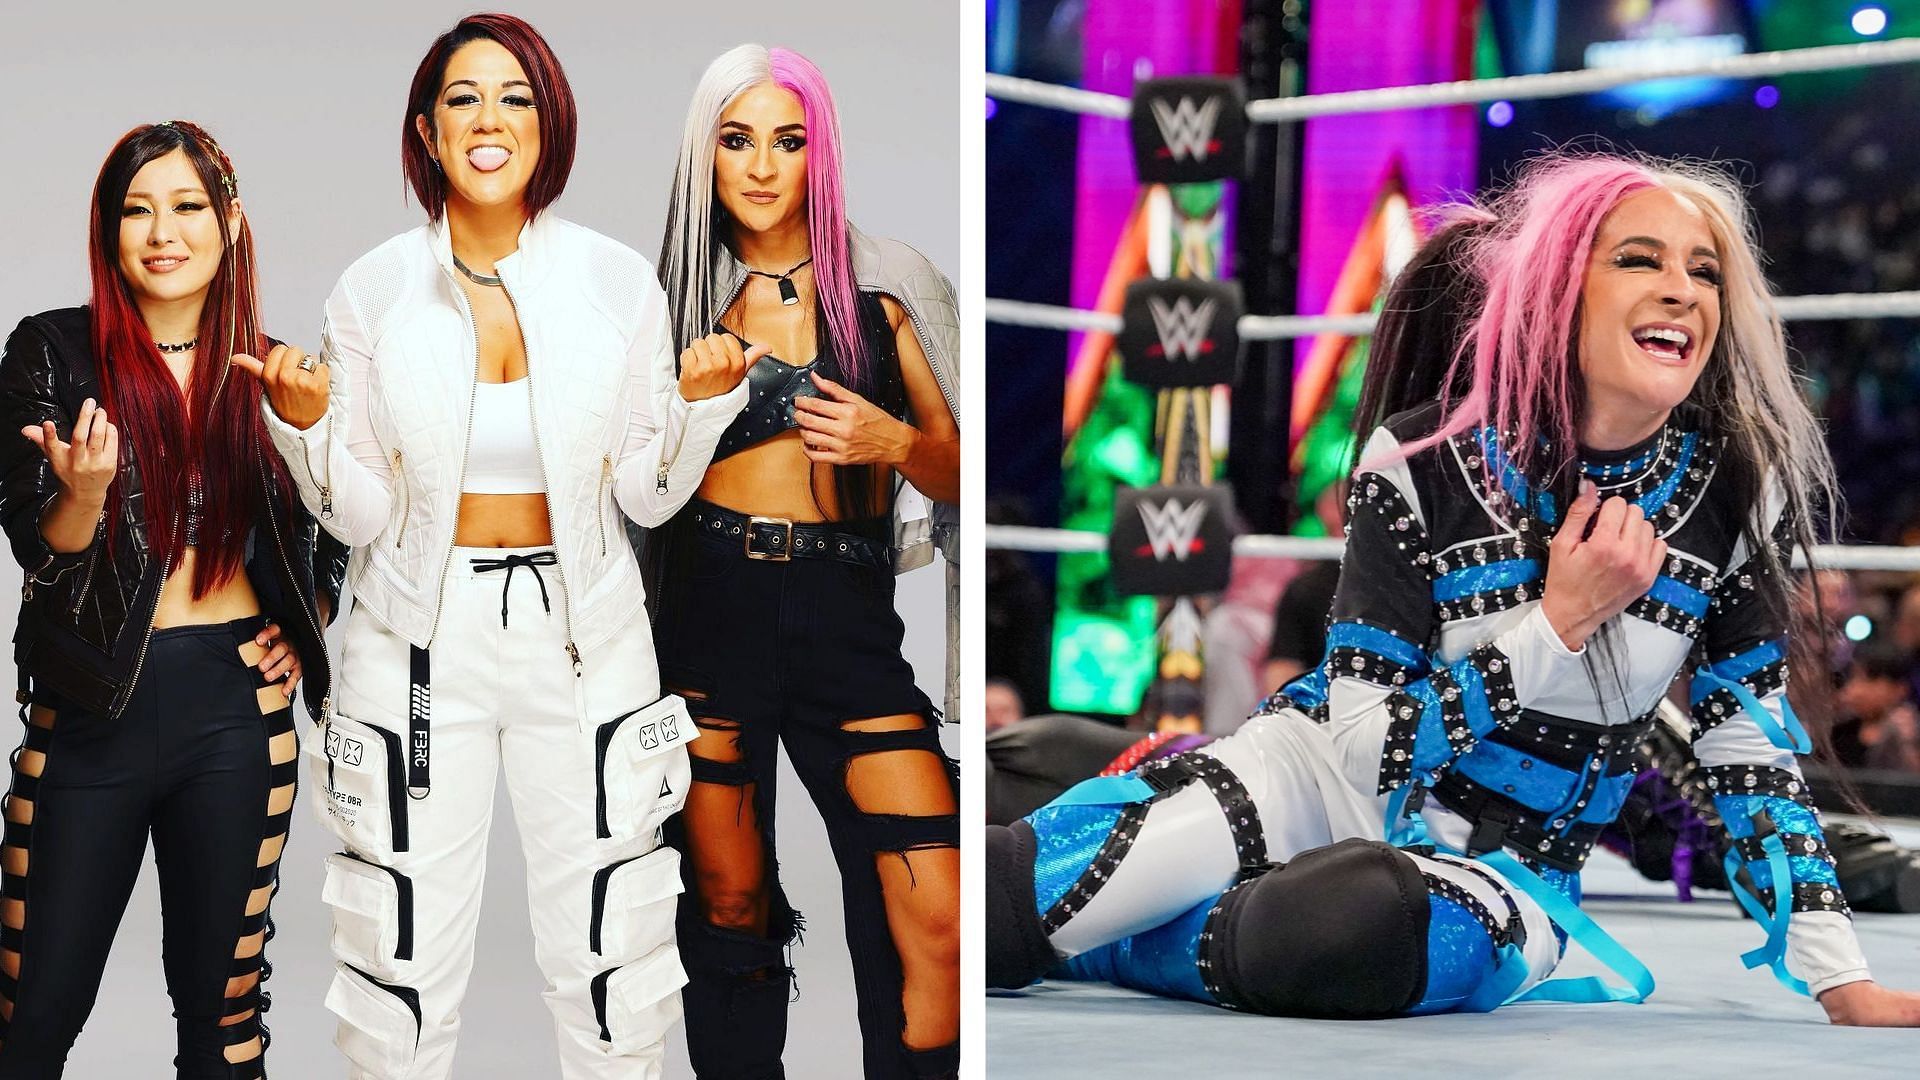 Damage CTRL may want to replace Dakota Kai with a different WWE Superstar for the time being